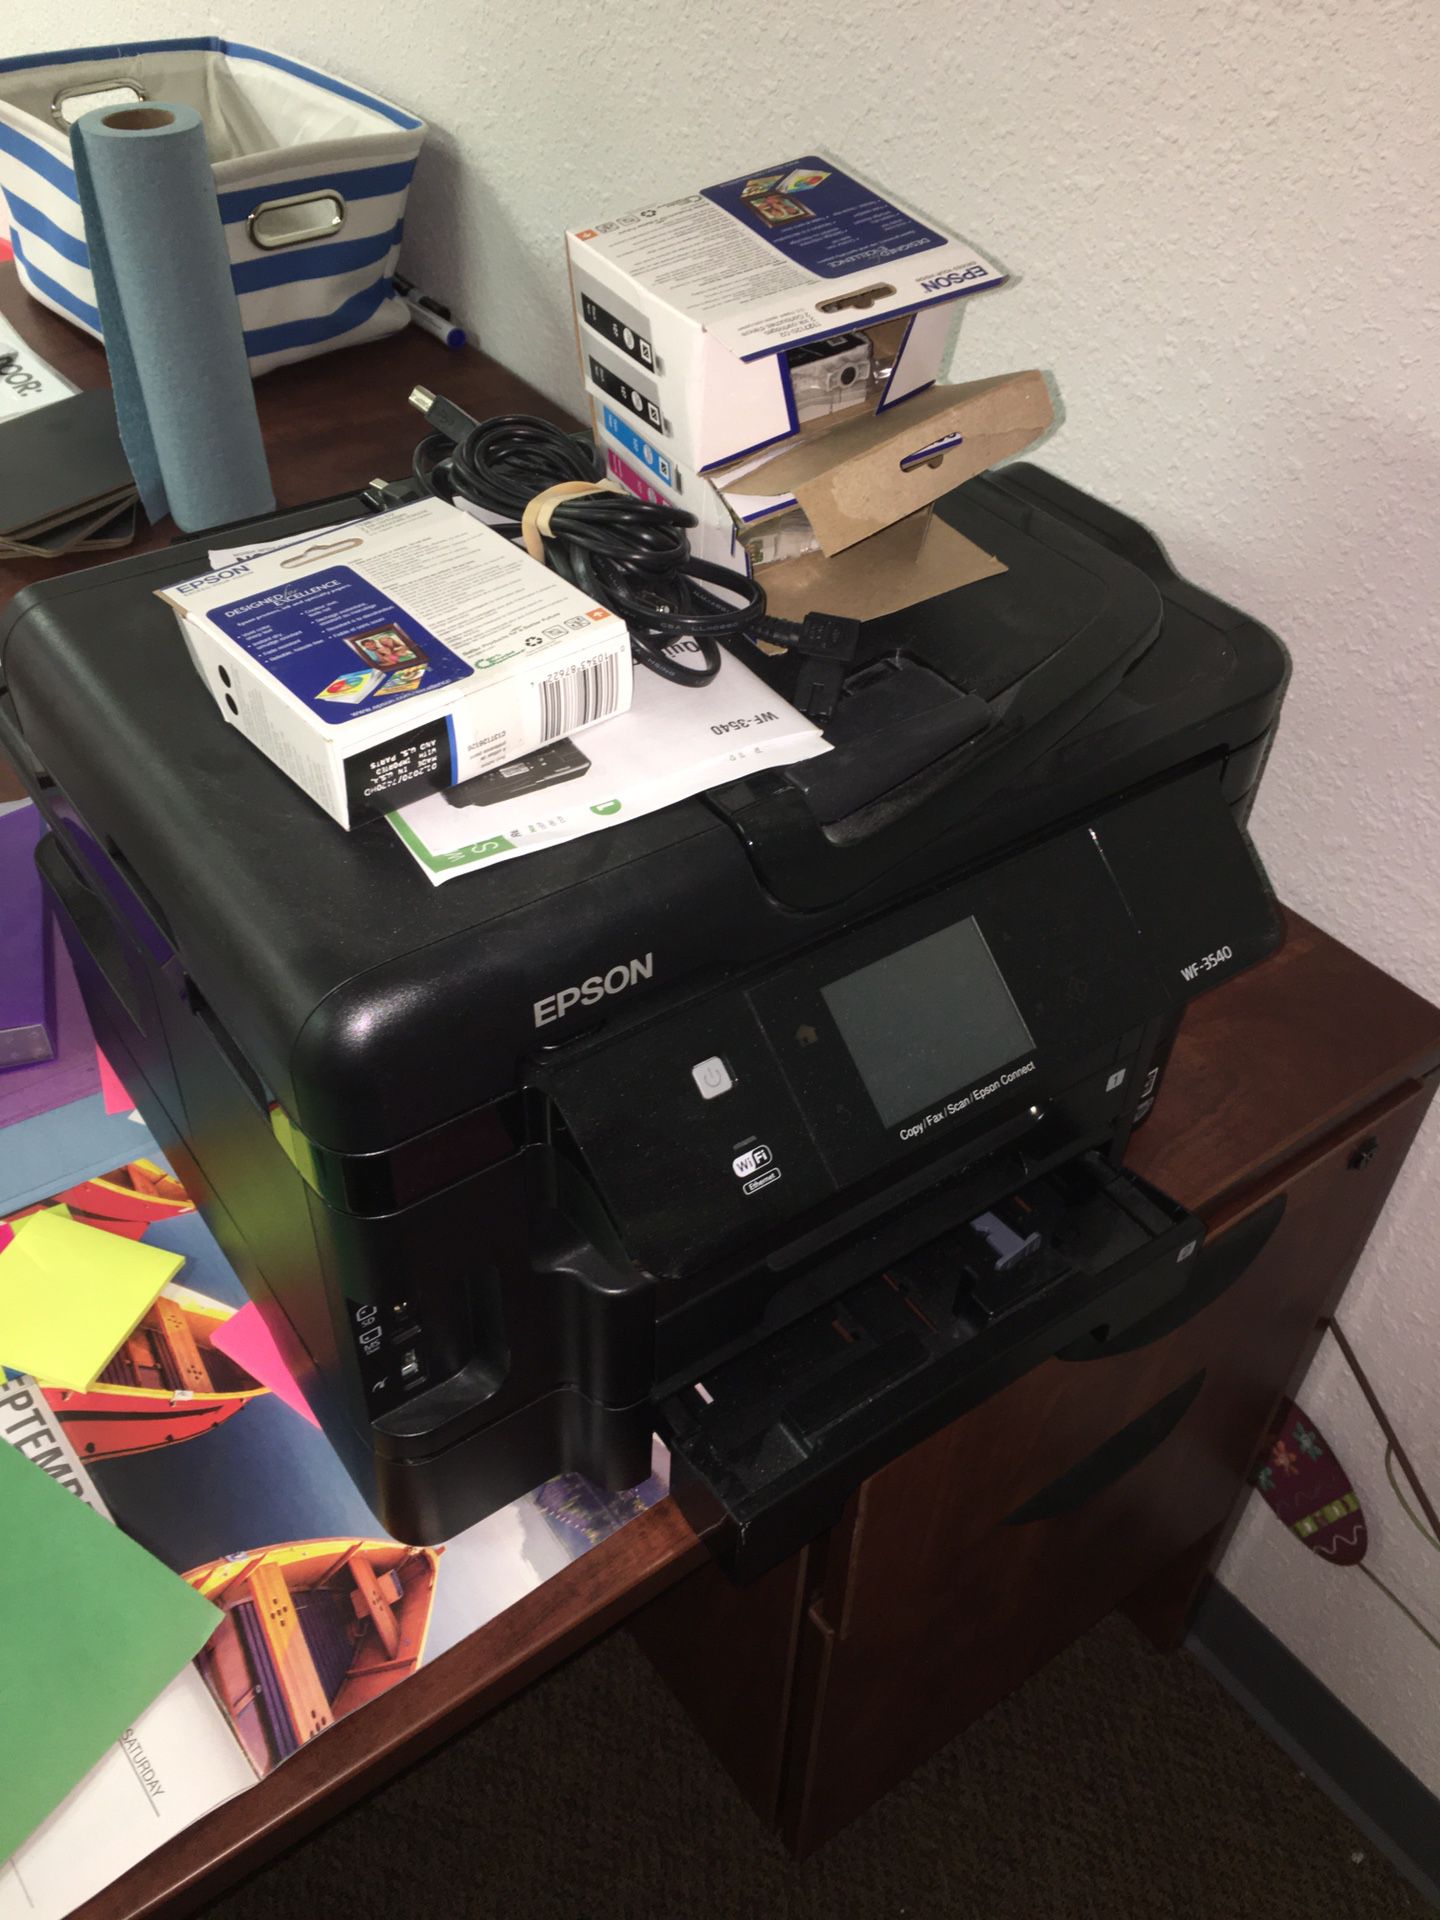 Epson WF-3540 printer with lots of ink